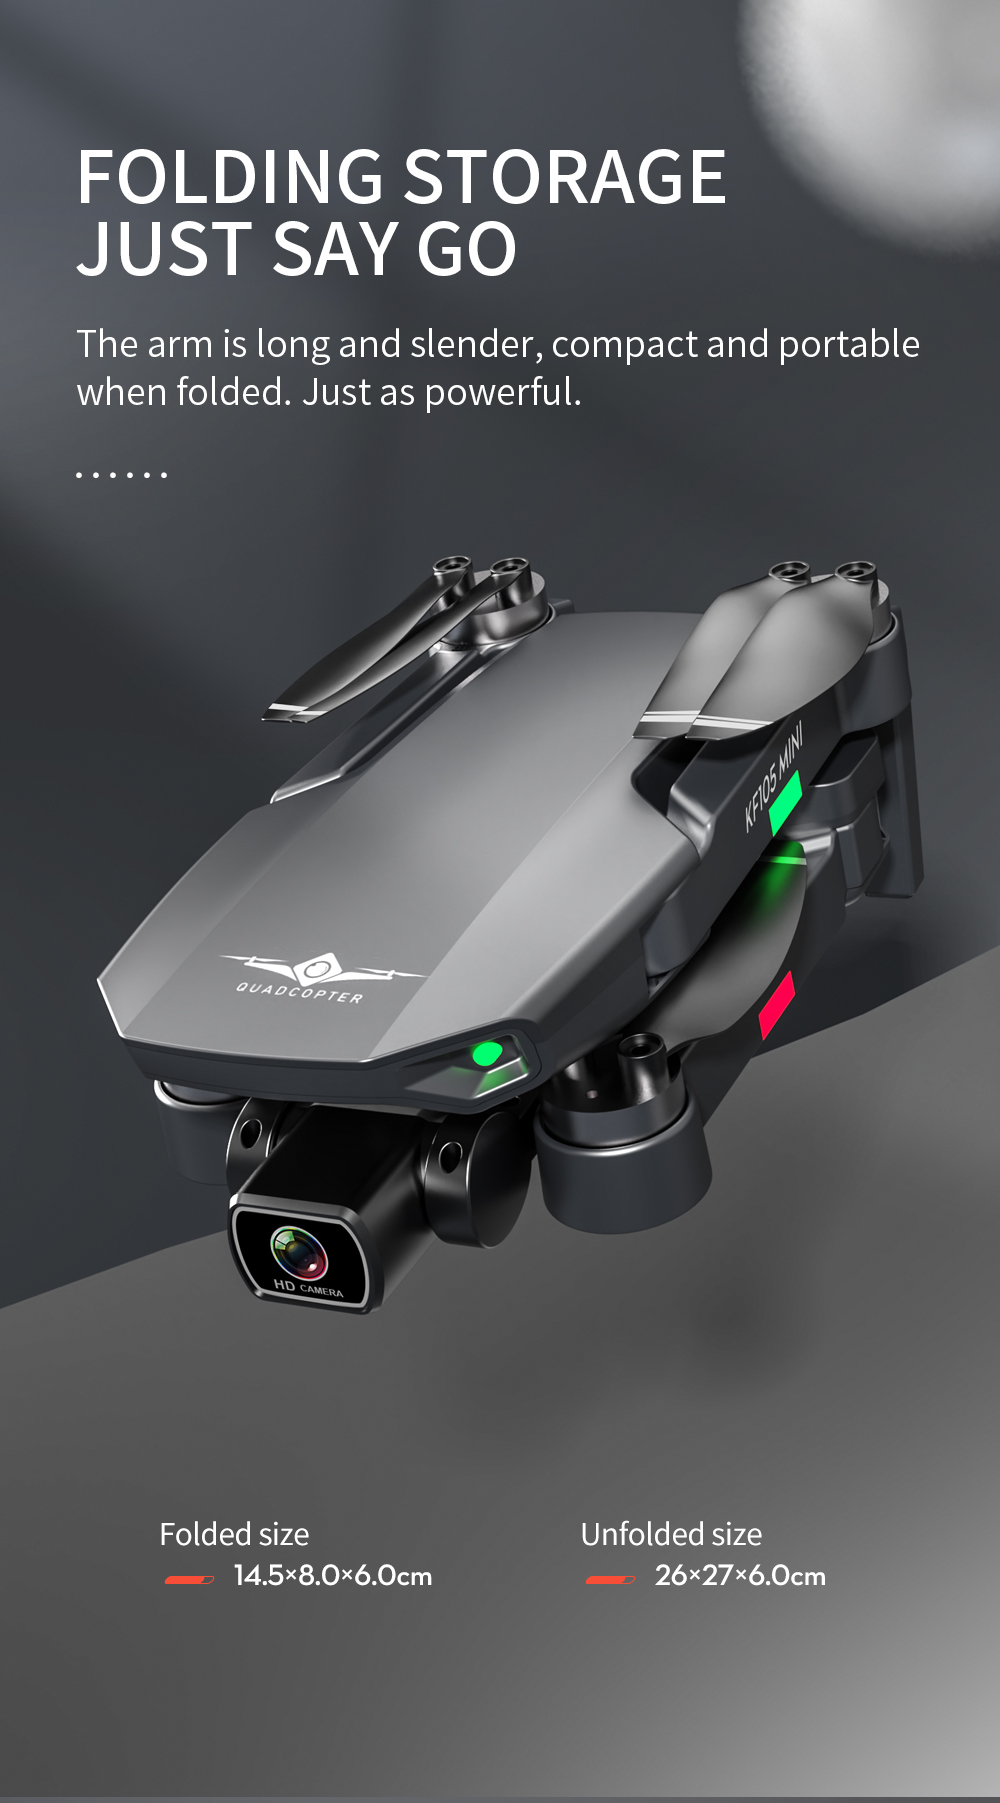 KF-KF105-GPS-5G-WiFi-FPV-with-4K-HD-ESC-Dual-Camera-Visual-Obstacle-Avoidance-Brushless-Foldable-RC--1916966-8